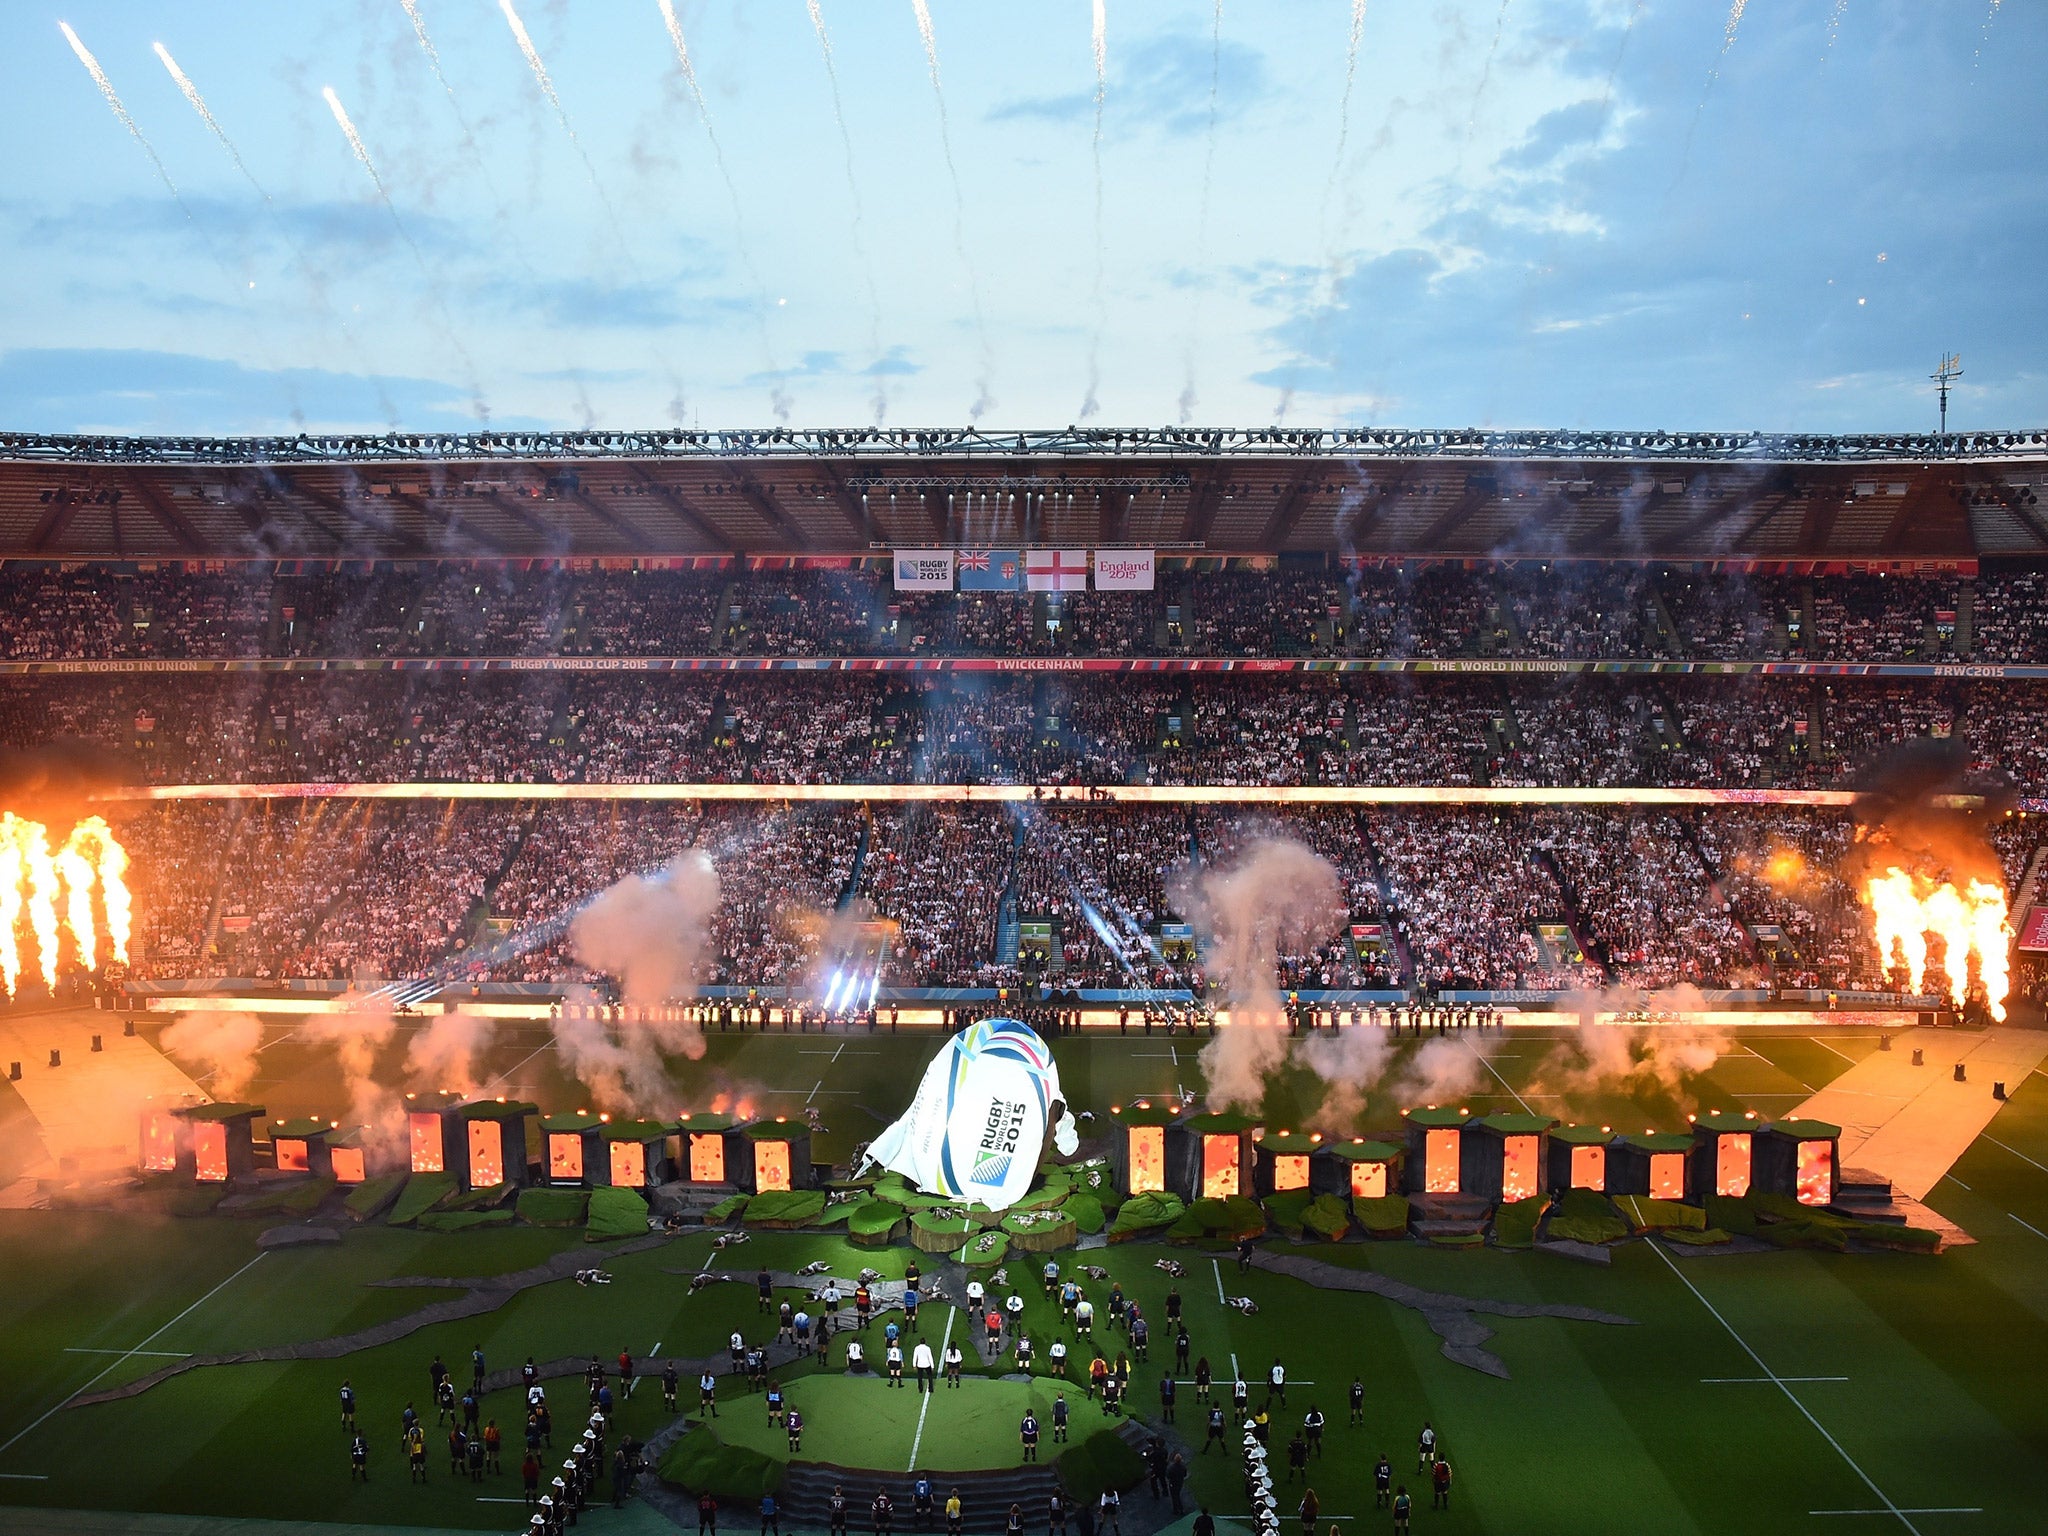 The Rugby World Cup 2015 opening ceremony